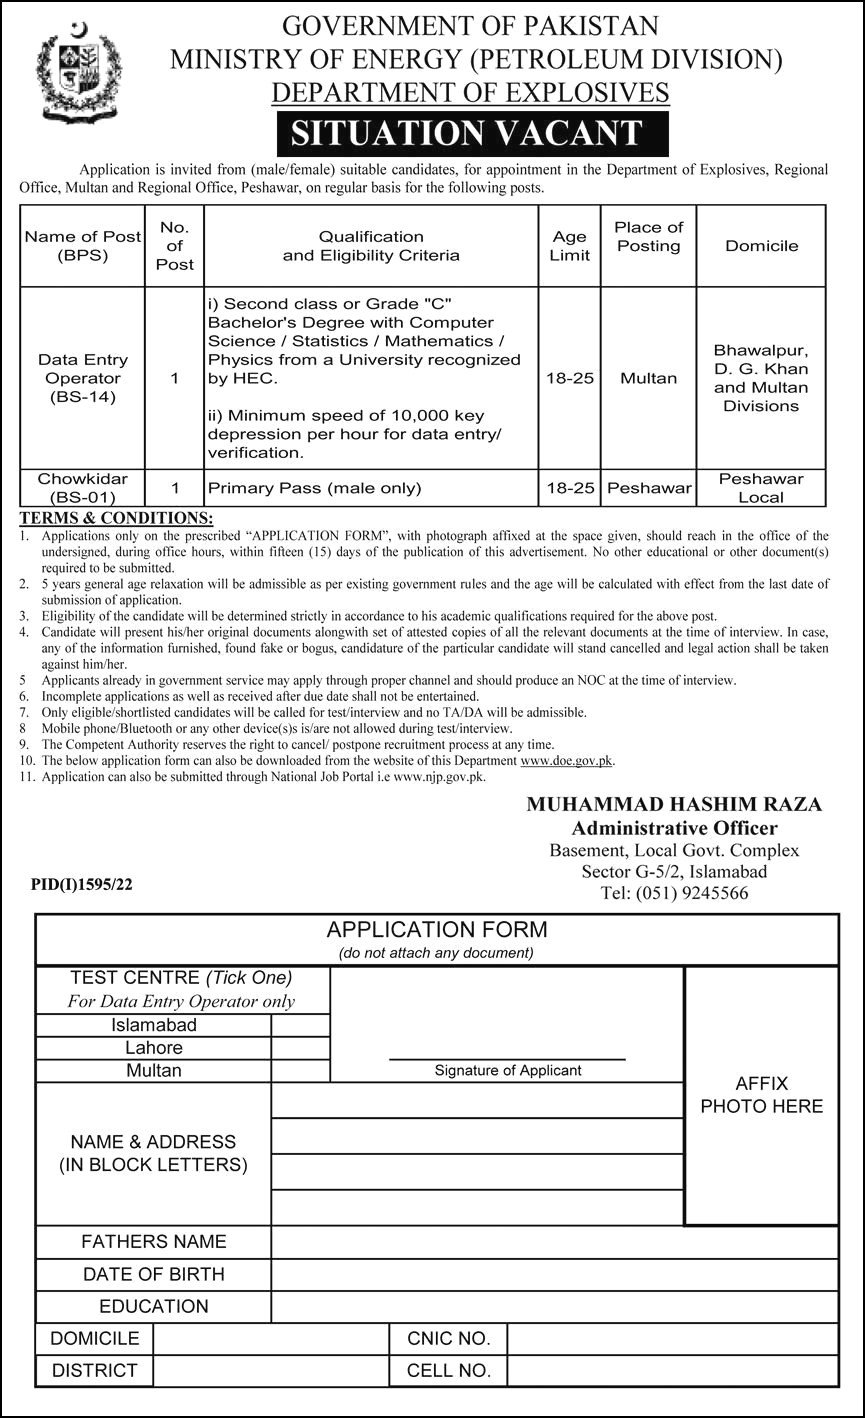 Ministry of Energy Jobs 2022